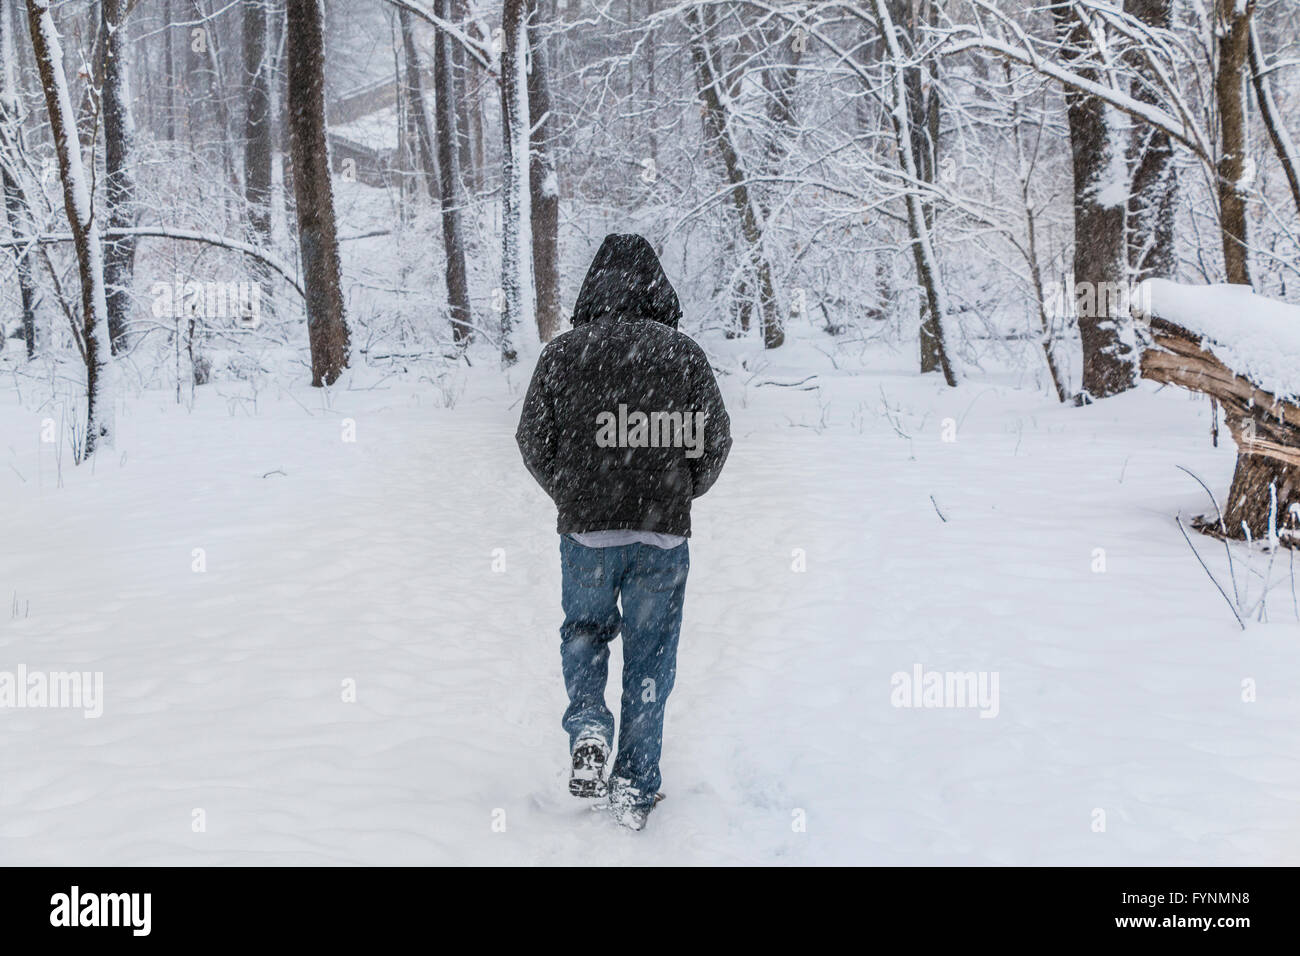 Man Walking Down Snowy Forest Trail Stock Photo